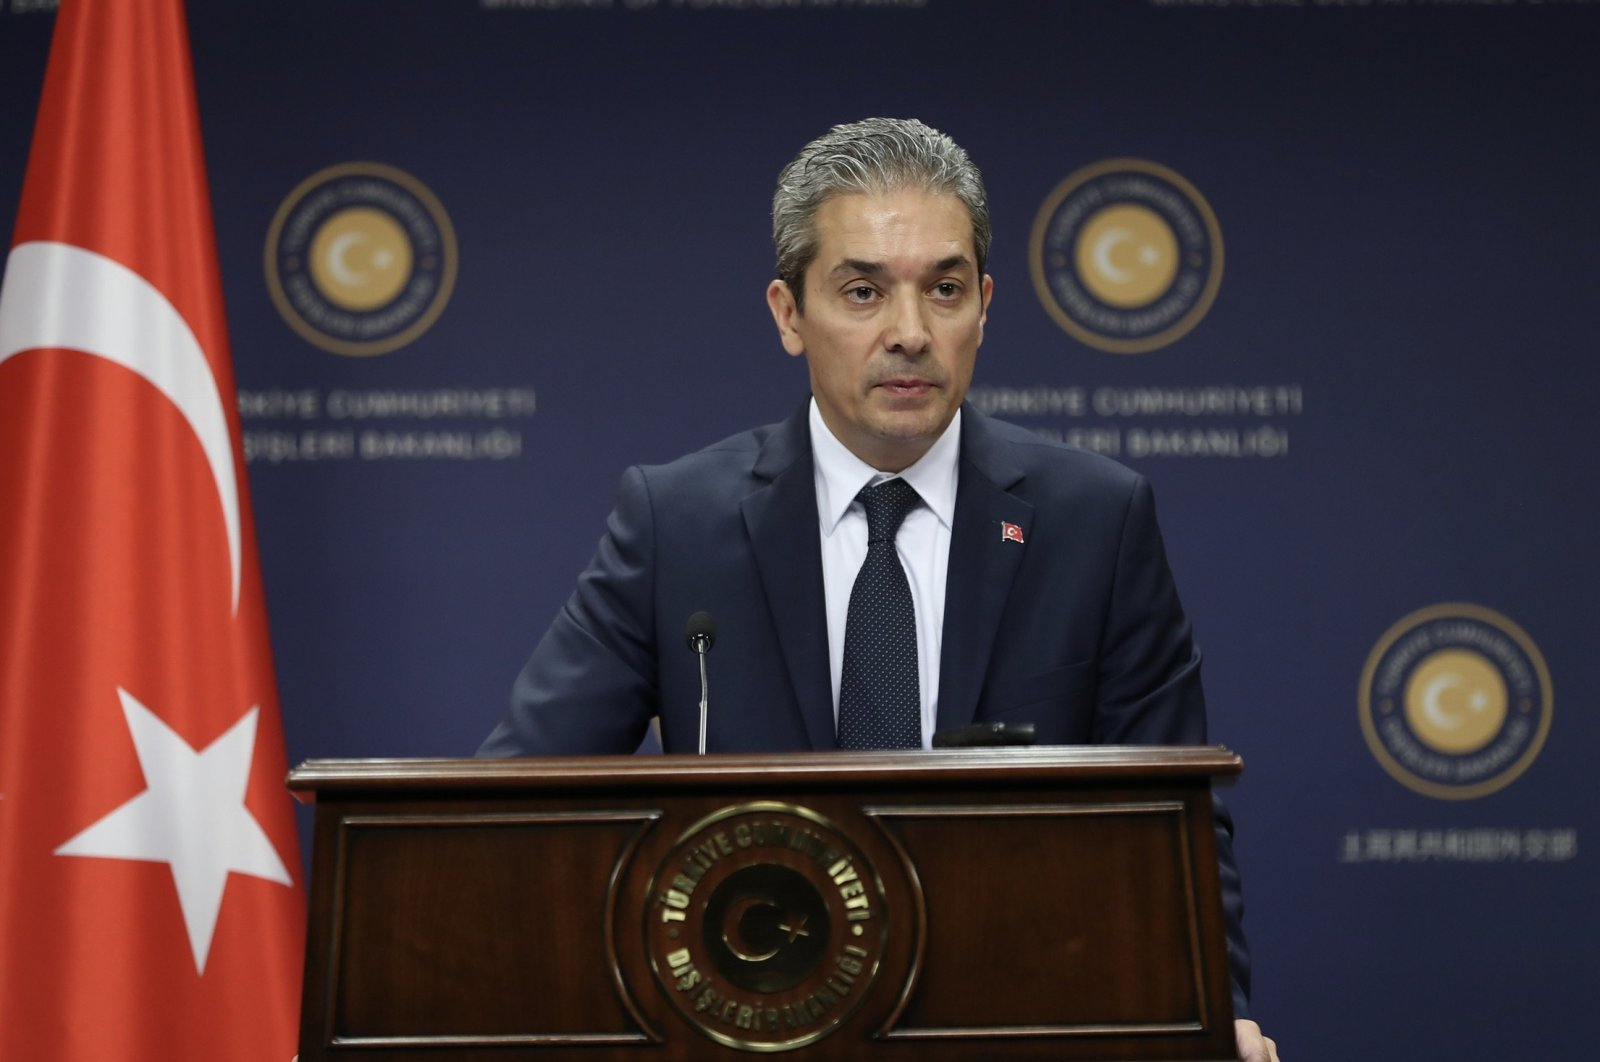 Foreign Ministry Spokesperson Hami Aksoy speaks at a news conference in Ankara, Turkey, May 28, 2018. (AA Photo)